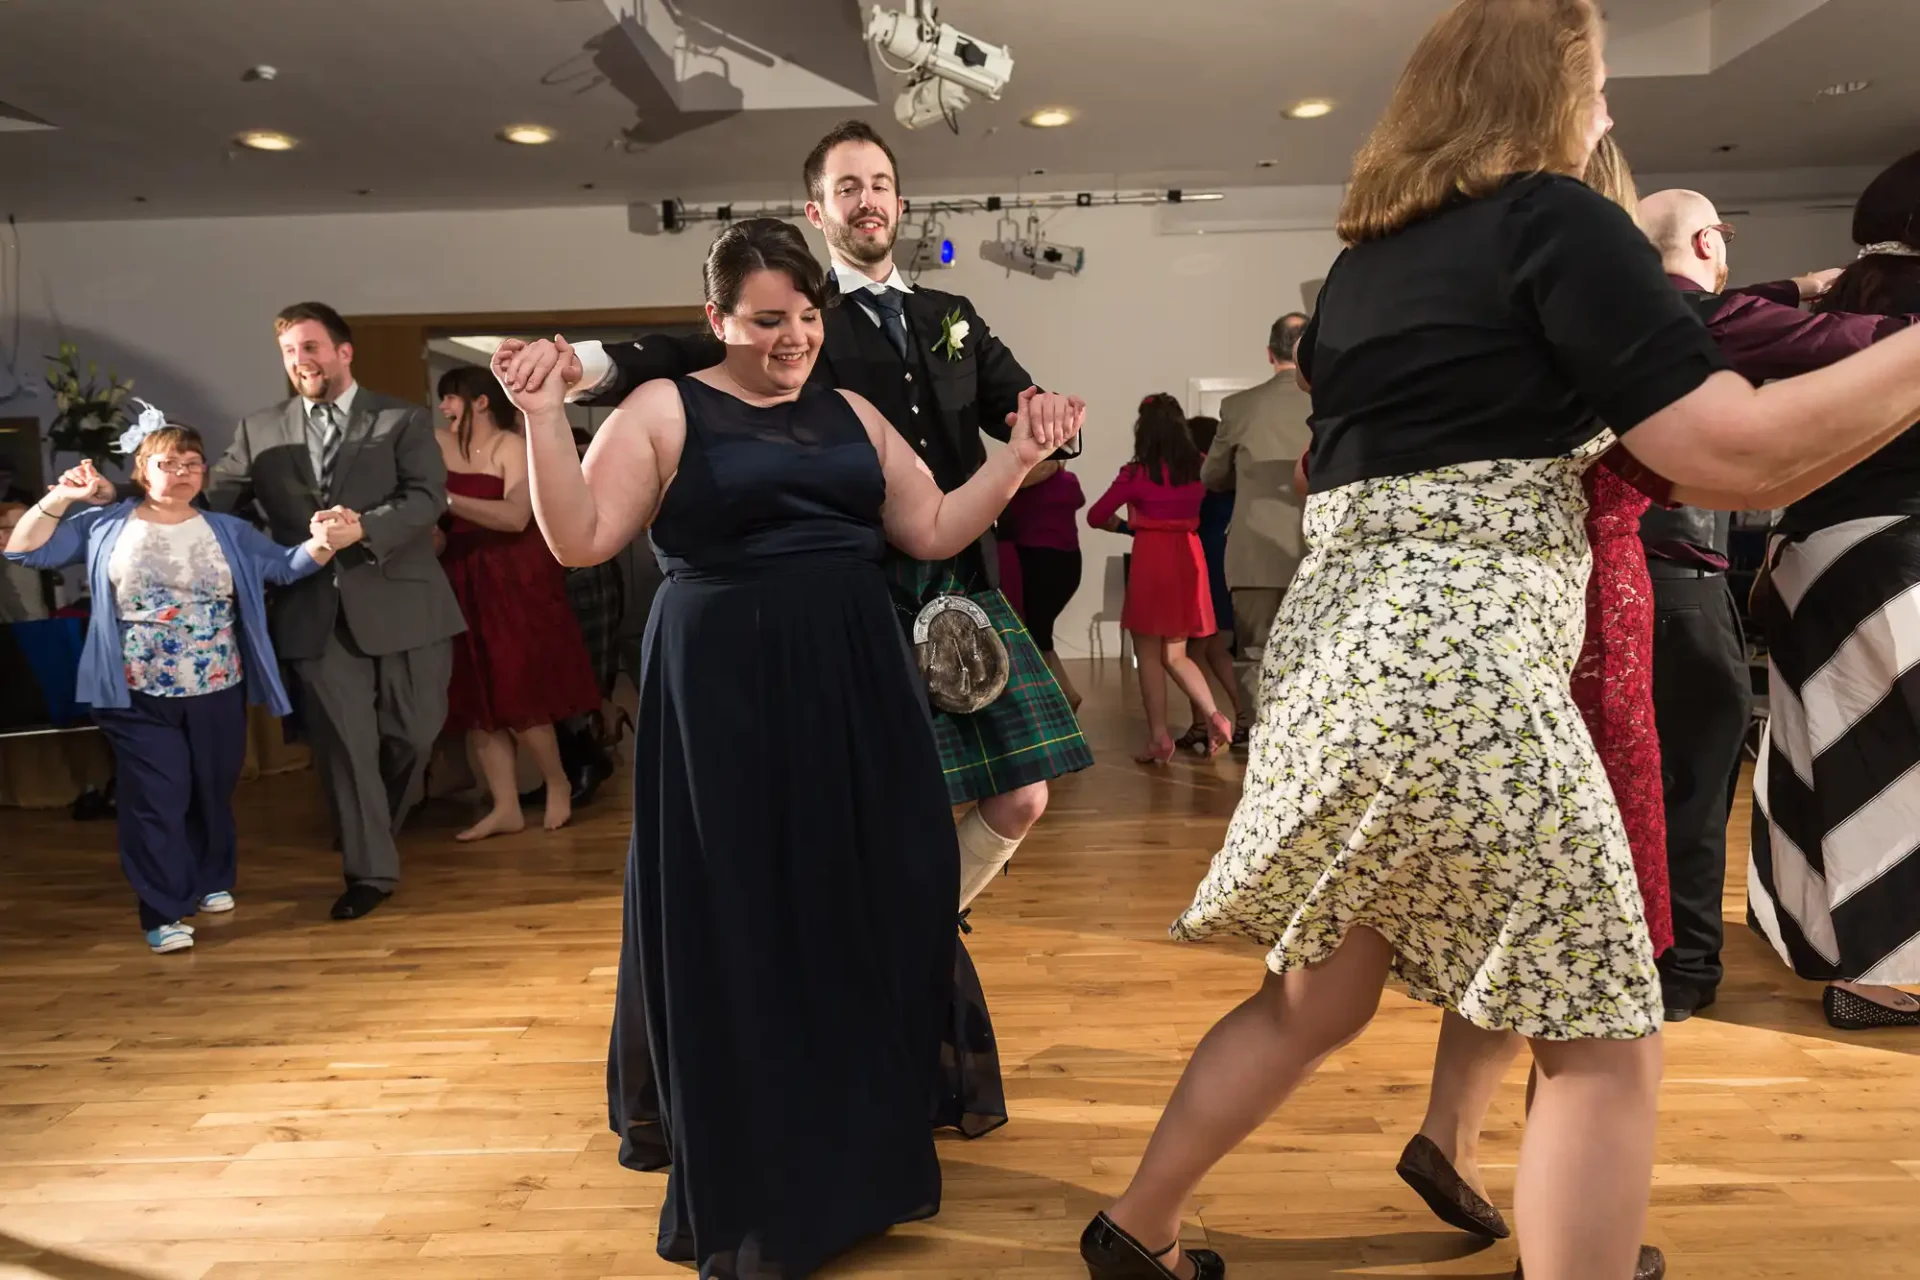 Guests enjoy dancing at a lively indoor wedding reception, with a man in a kilt and woman in a blue dress smiling and holding hands in the foreground.